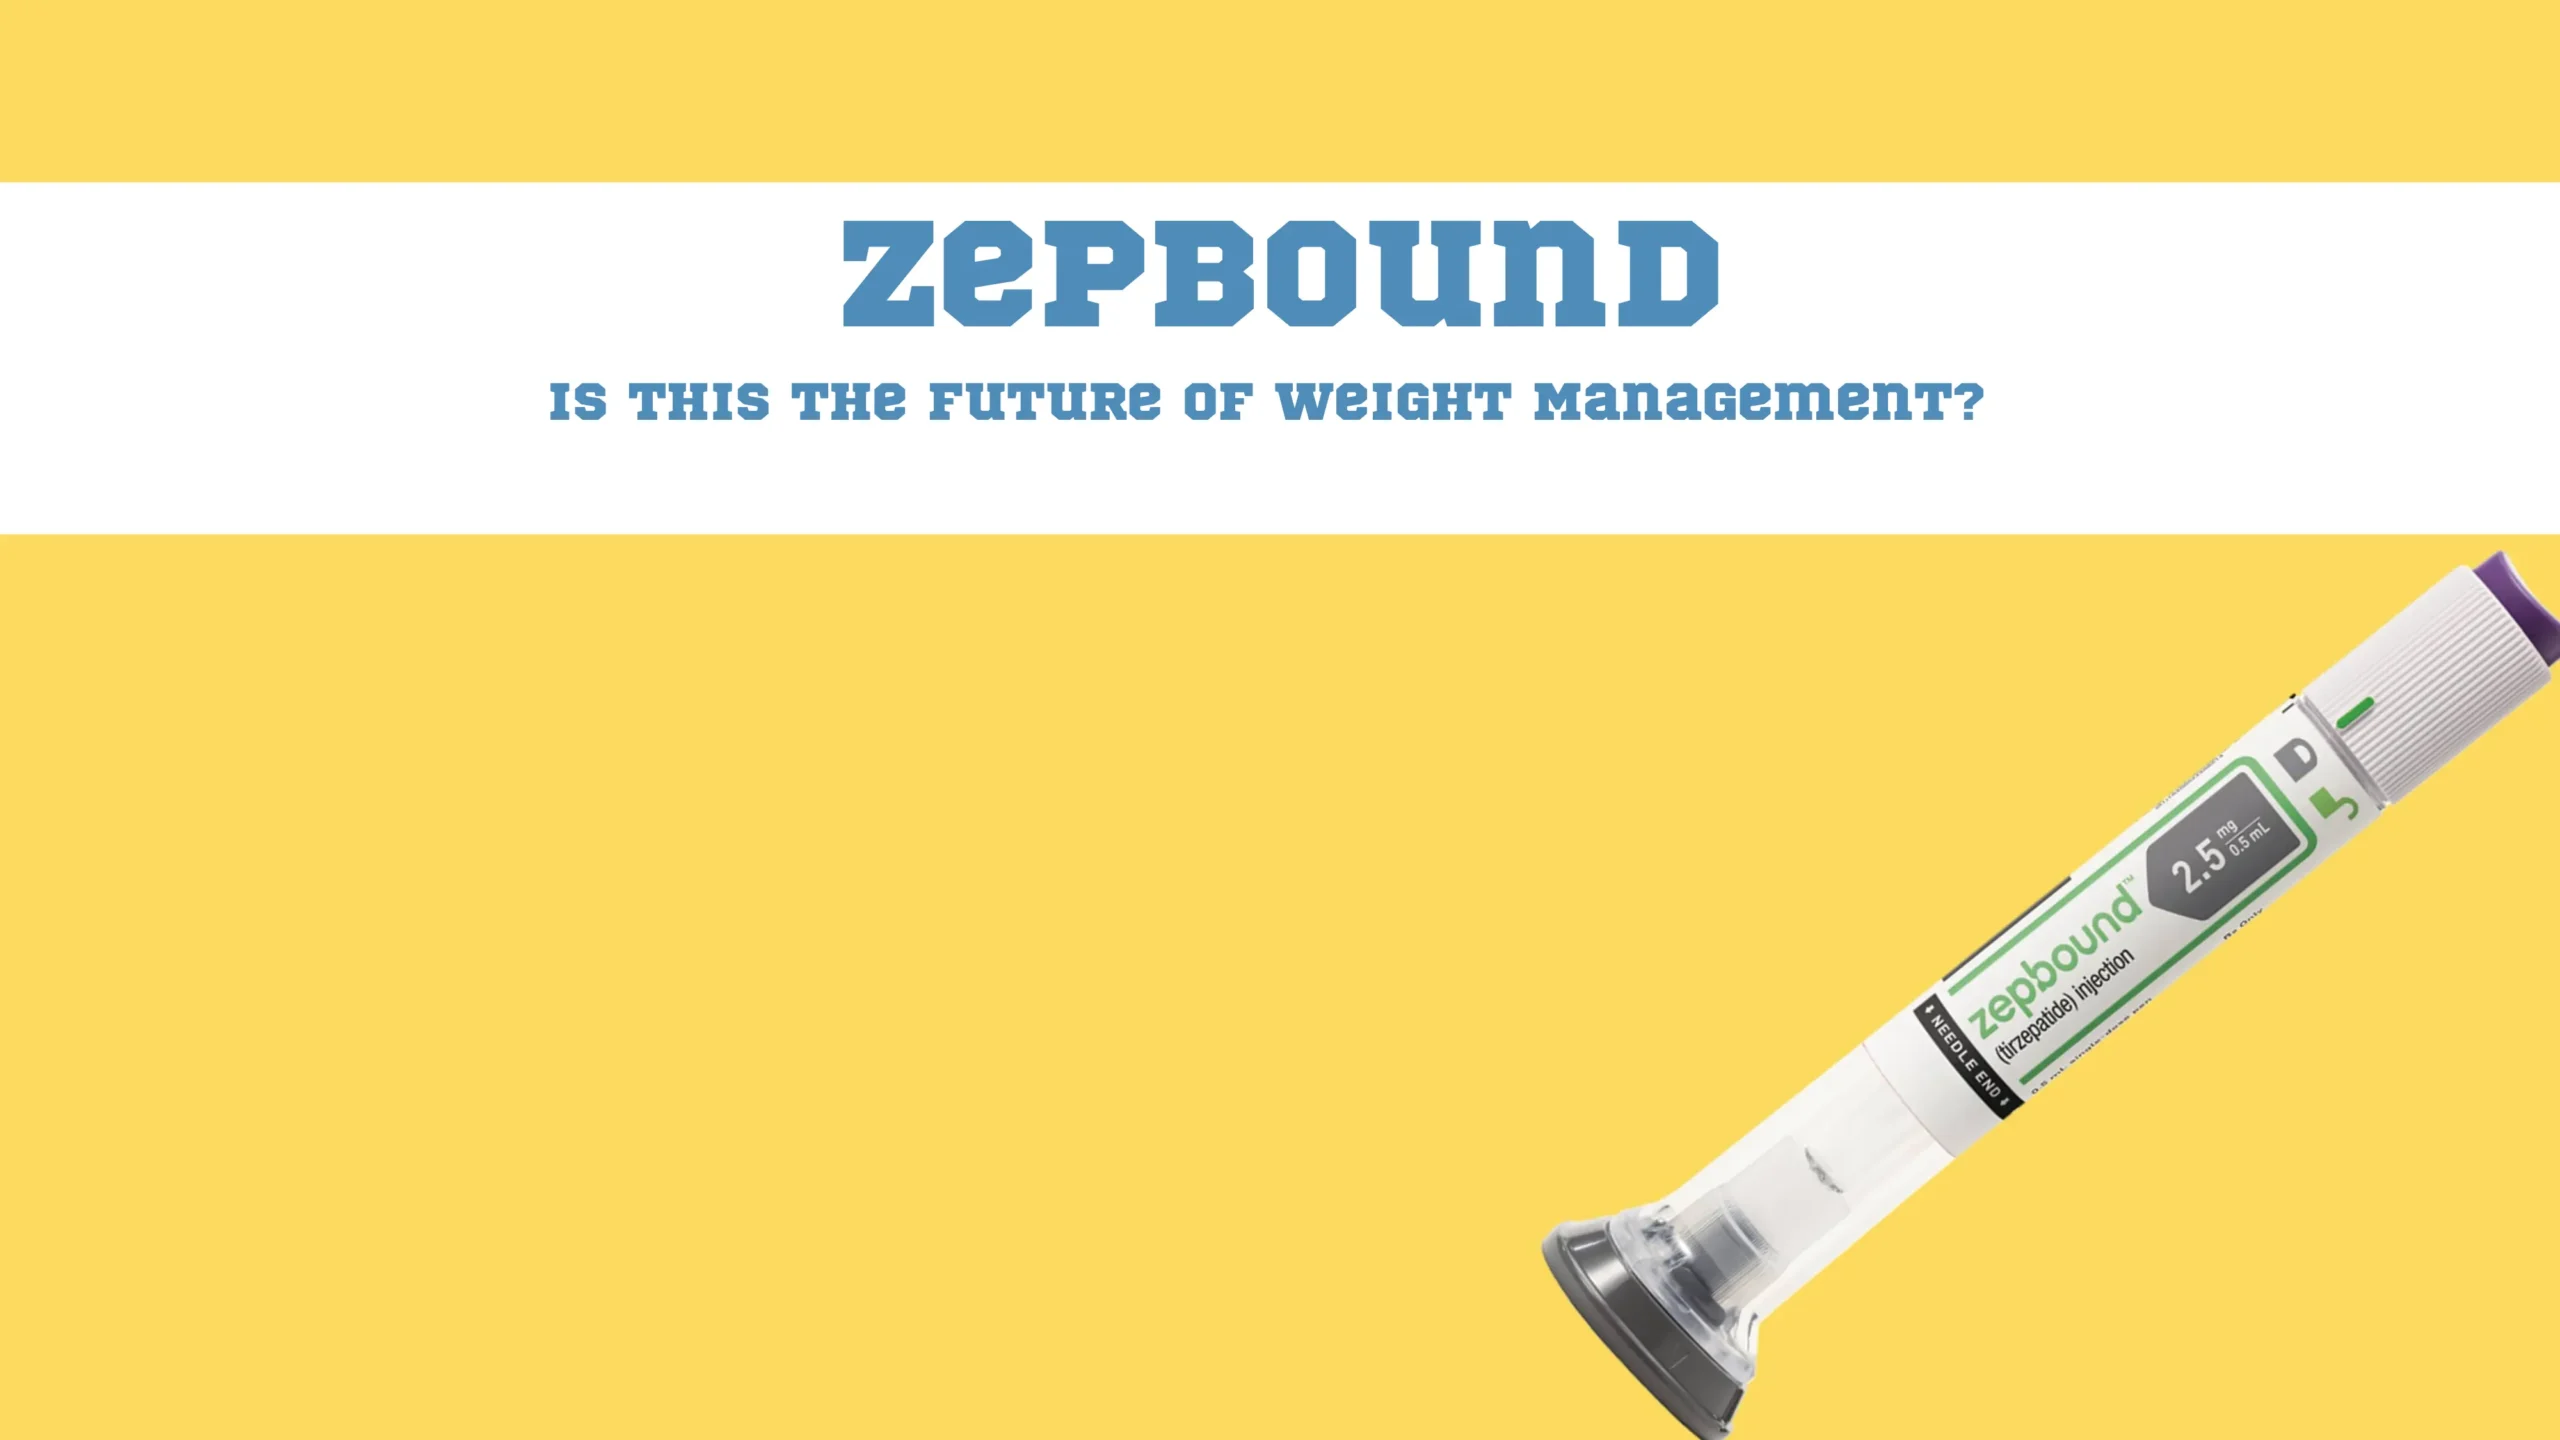 Zepbound - Is This the Future of Weight Management